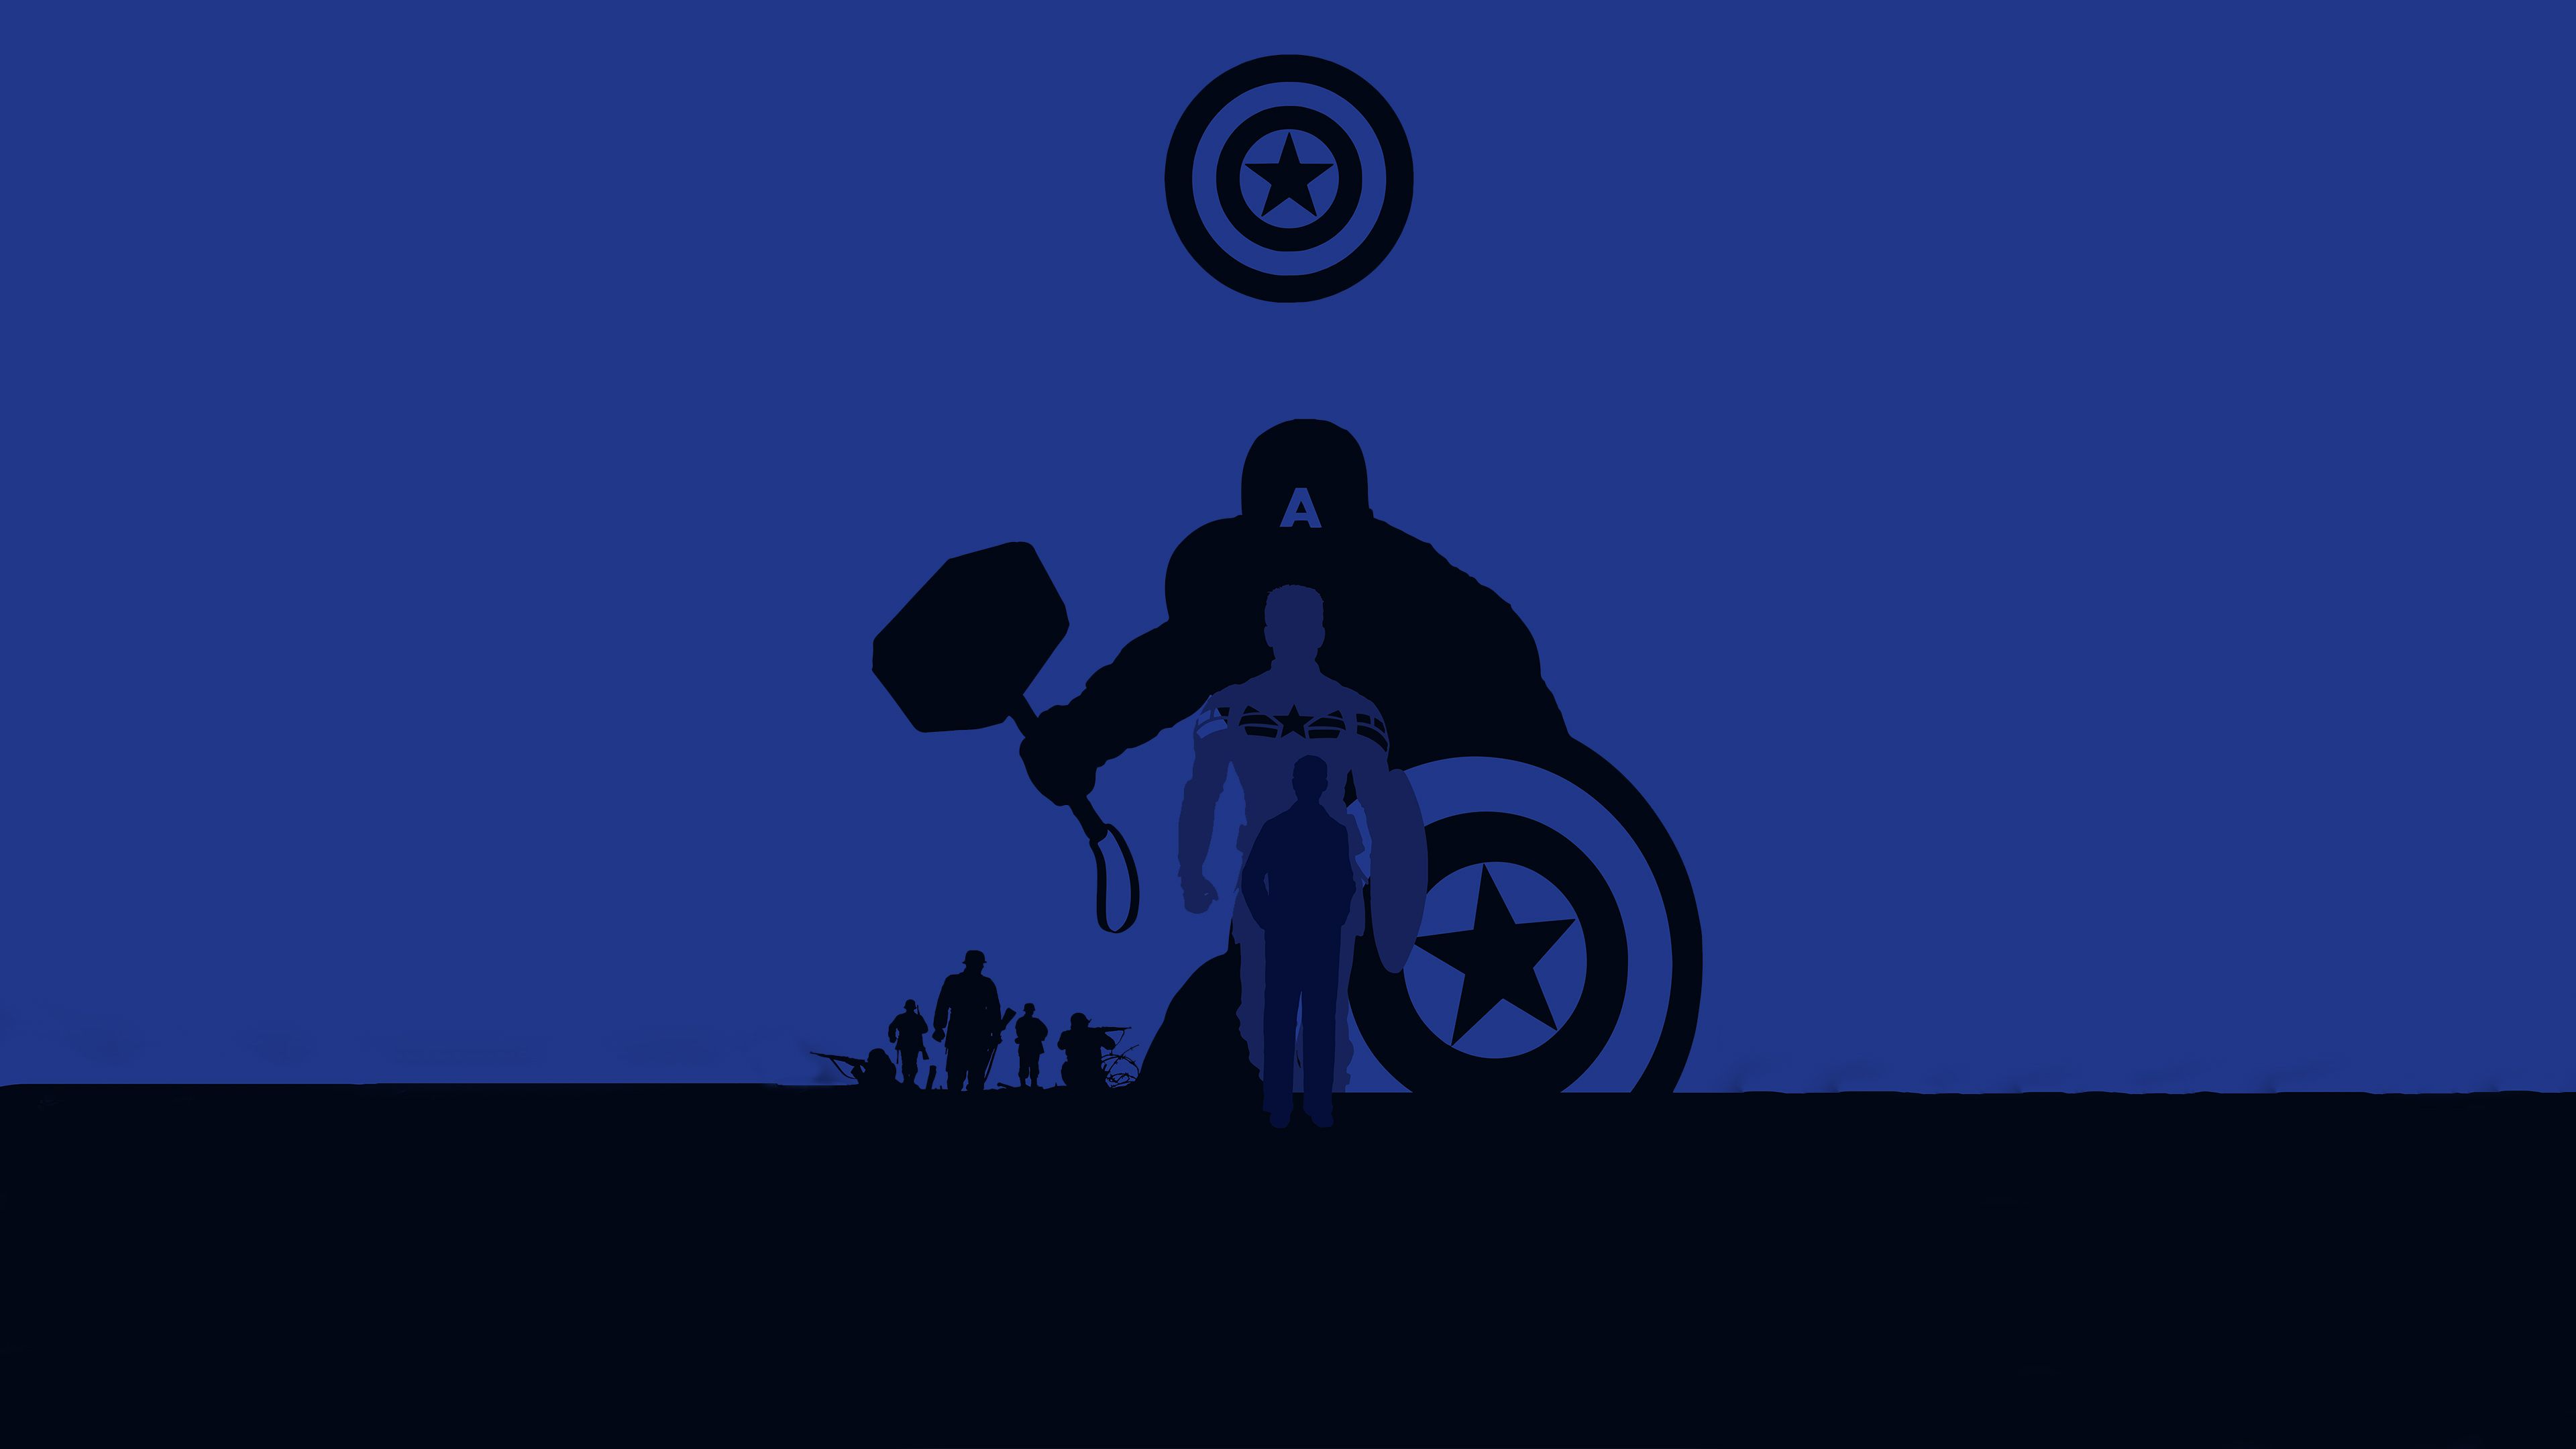 Captain America Avengers Endgame 4k Minimalism, HD Superheroes, 4k Wallpaper, Image, Background, Photo and Picture